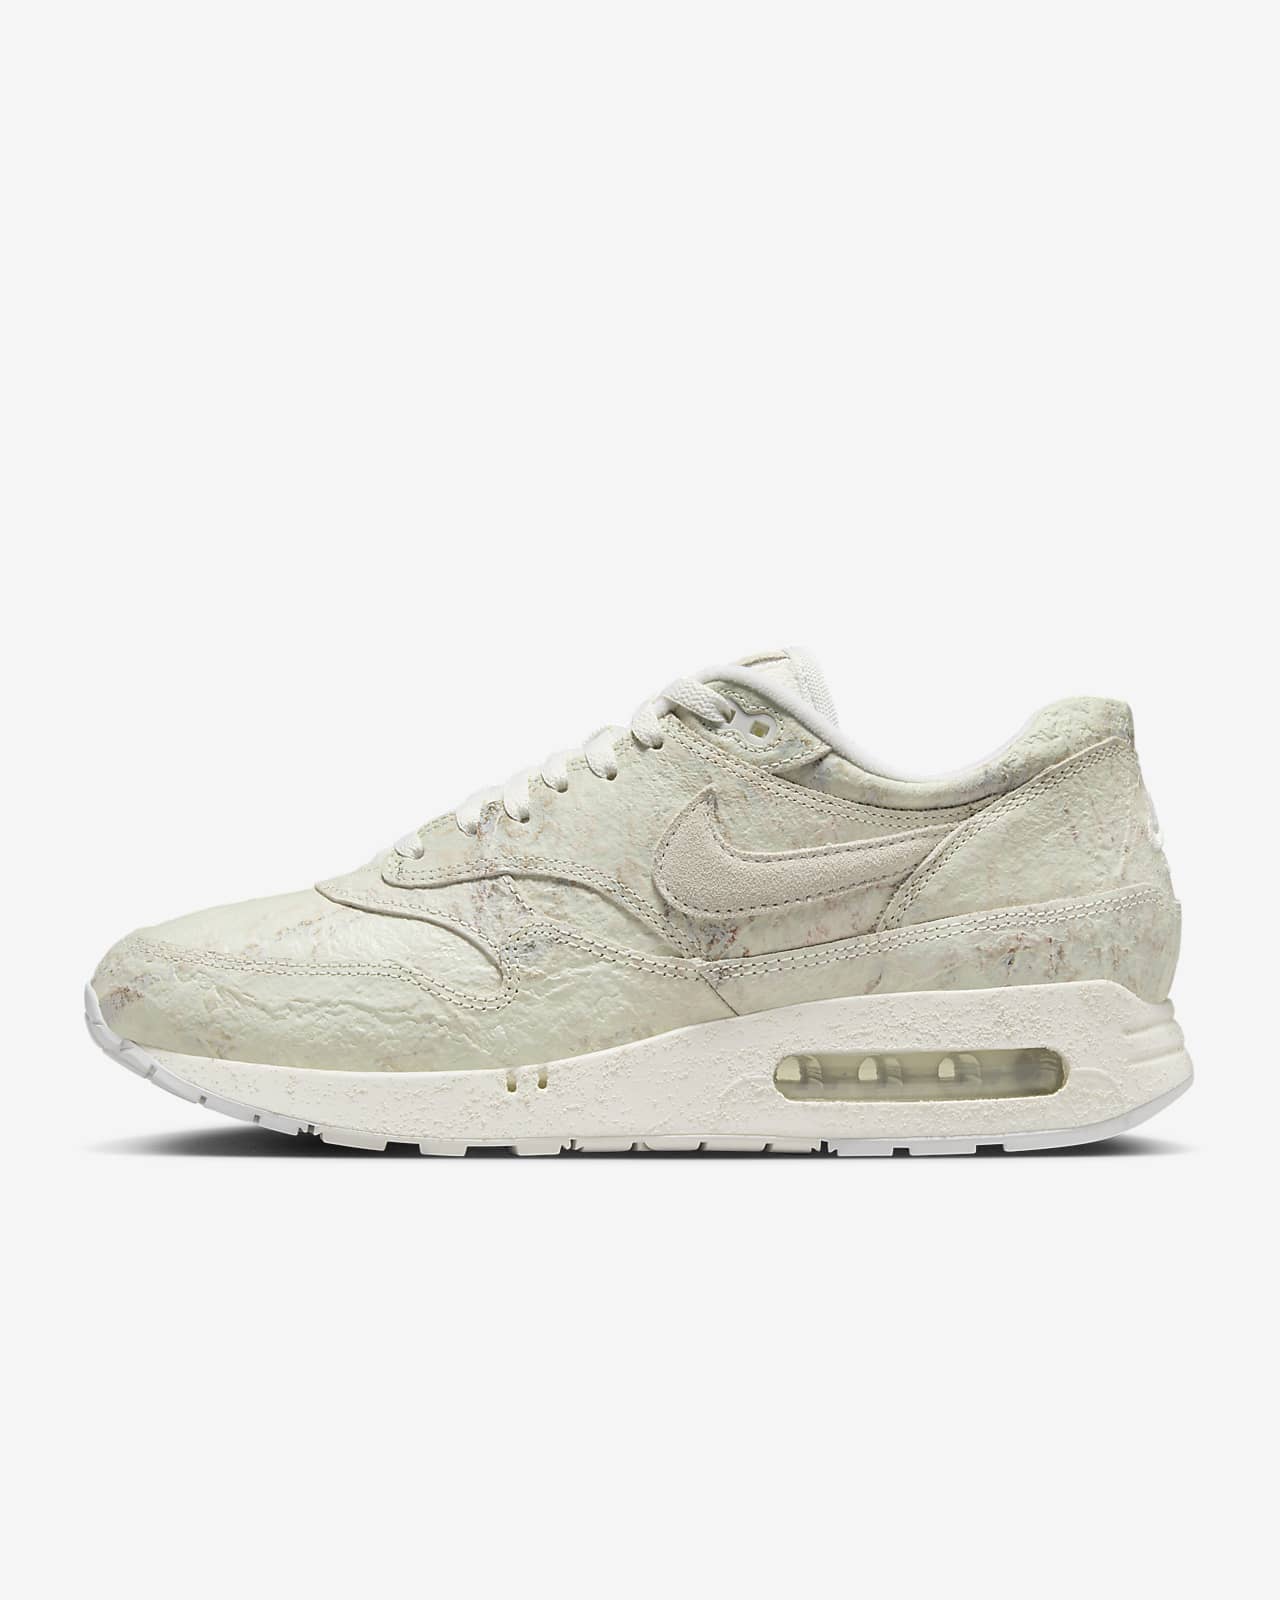 Chaussure Nike Air Max 1 '86 OG pour homme